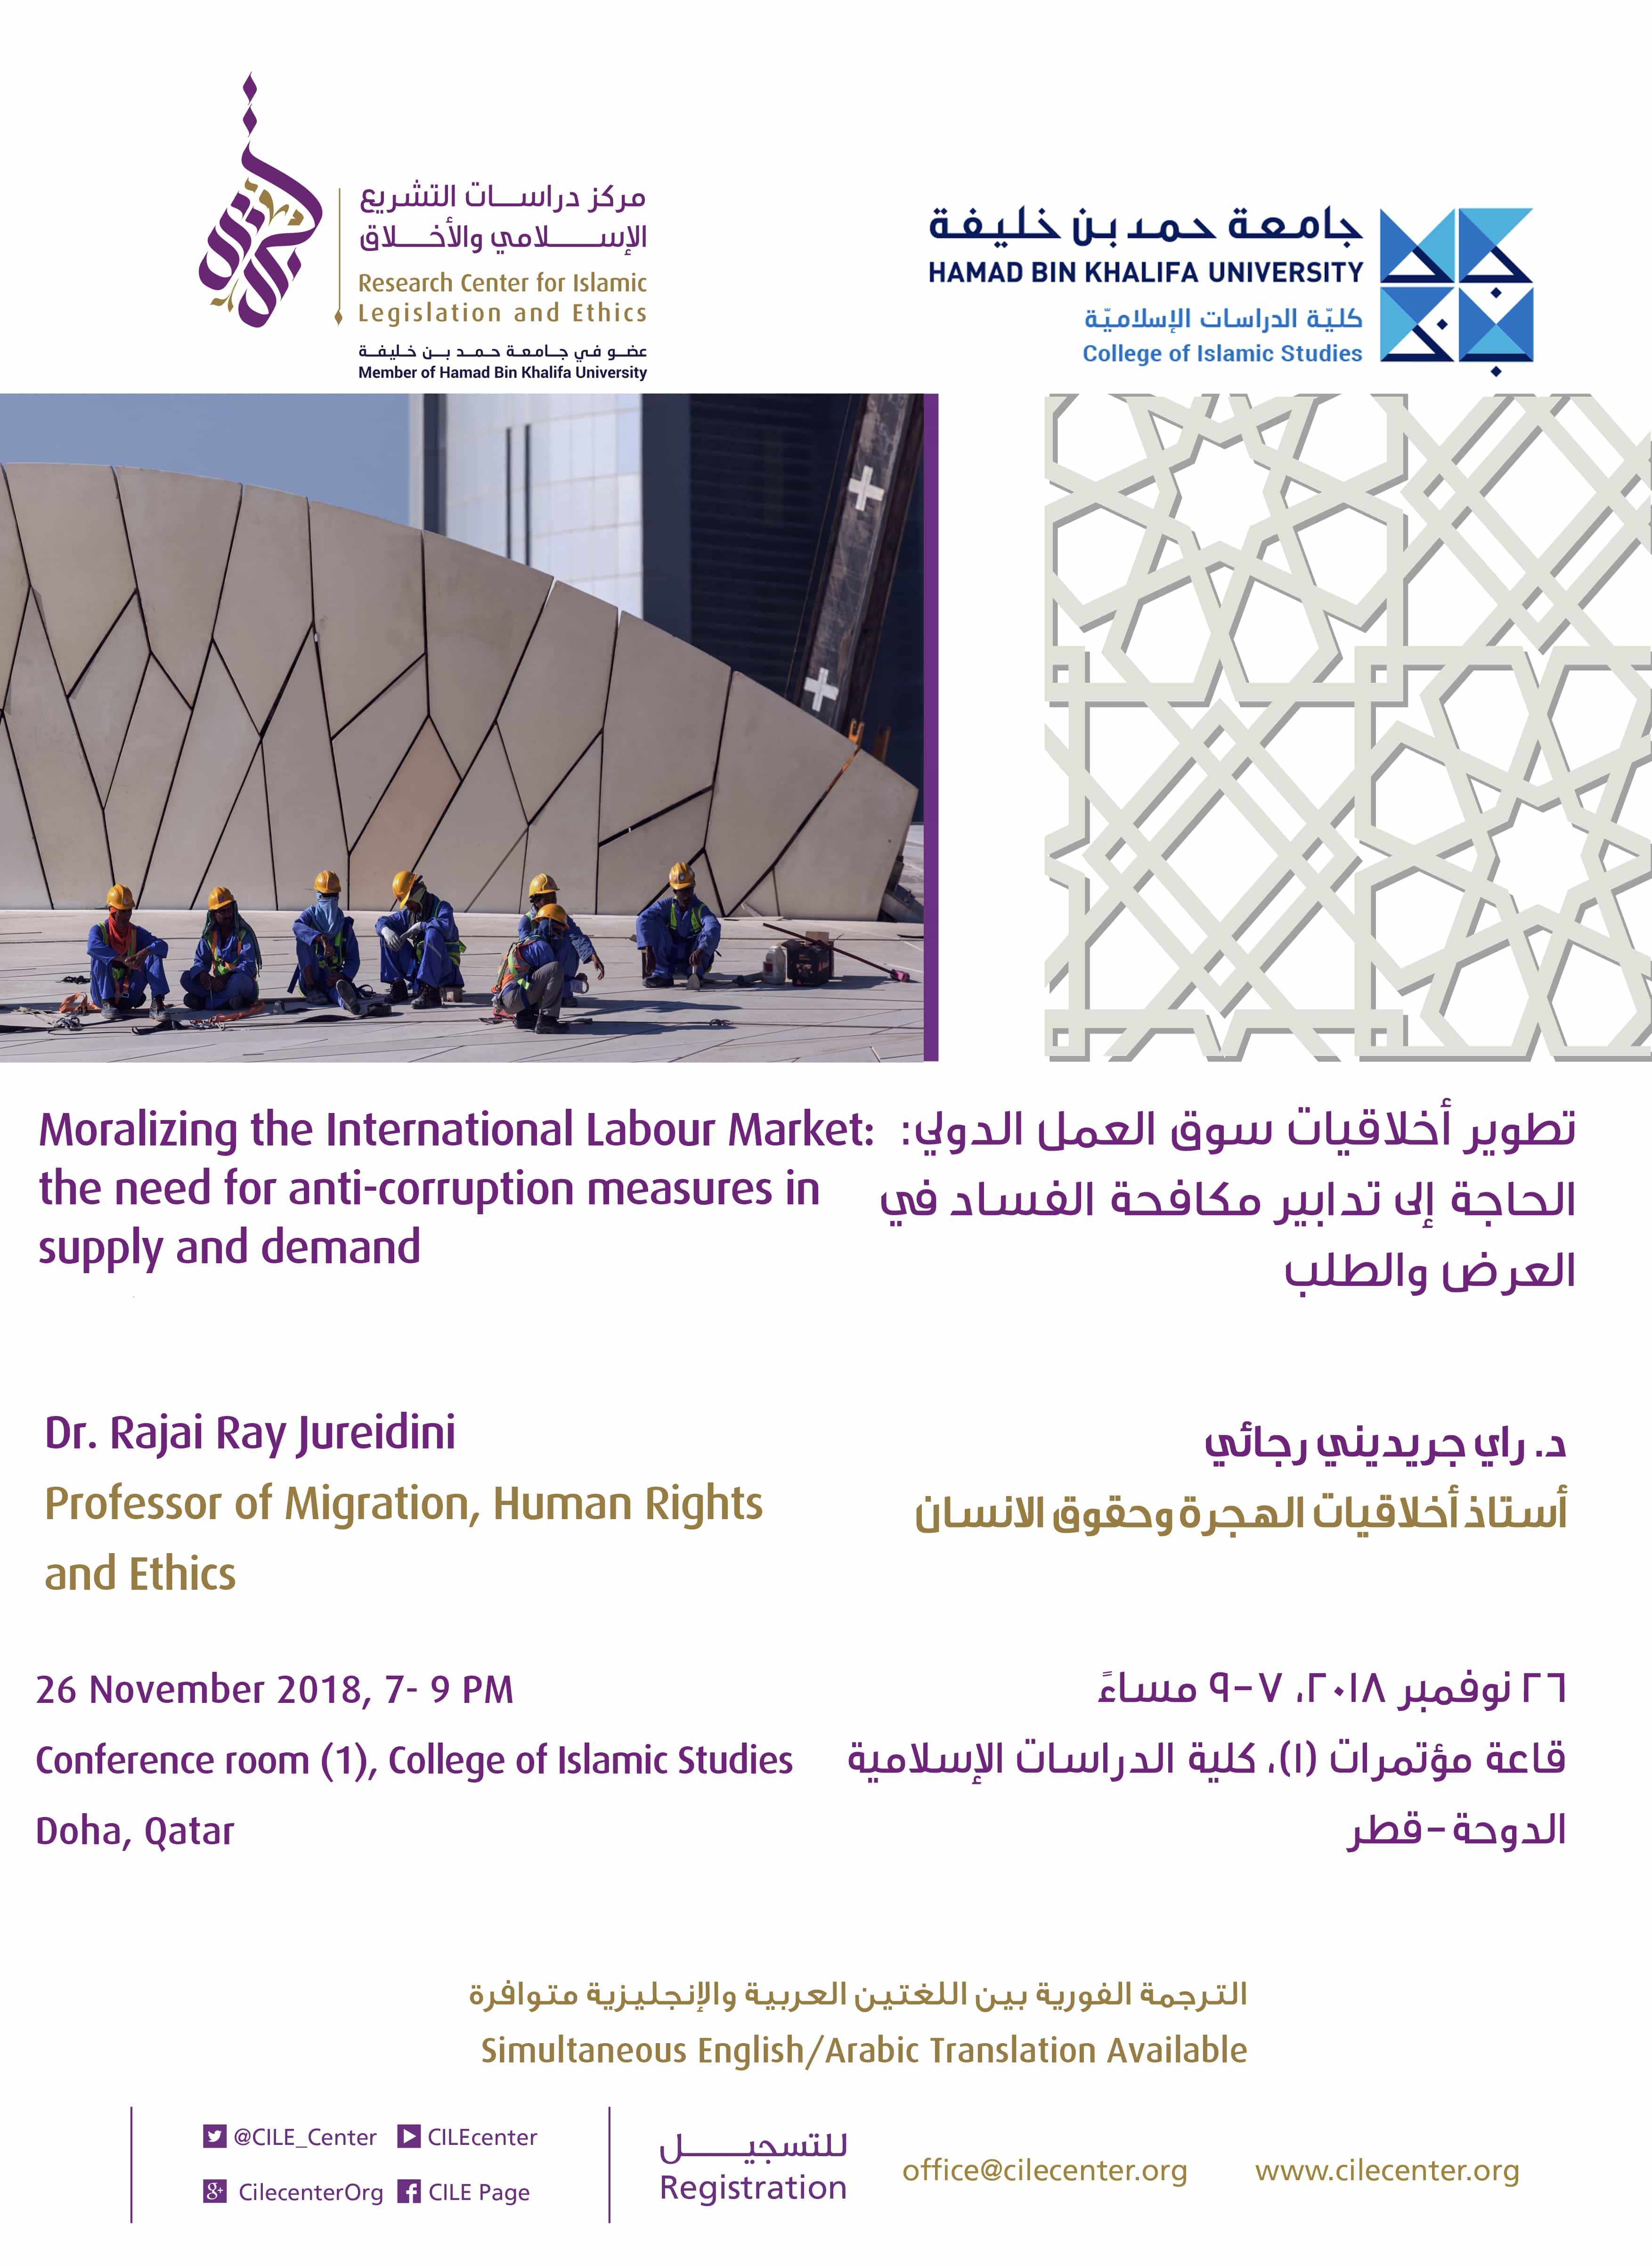 11/2018 Moralizing the International Labour Market: the need for anti-corruption measures in supply and demand